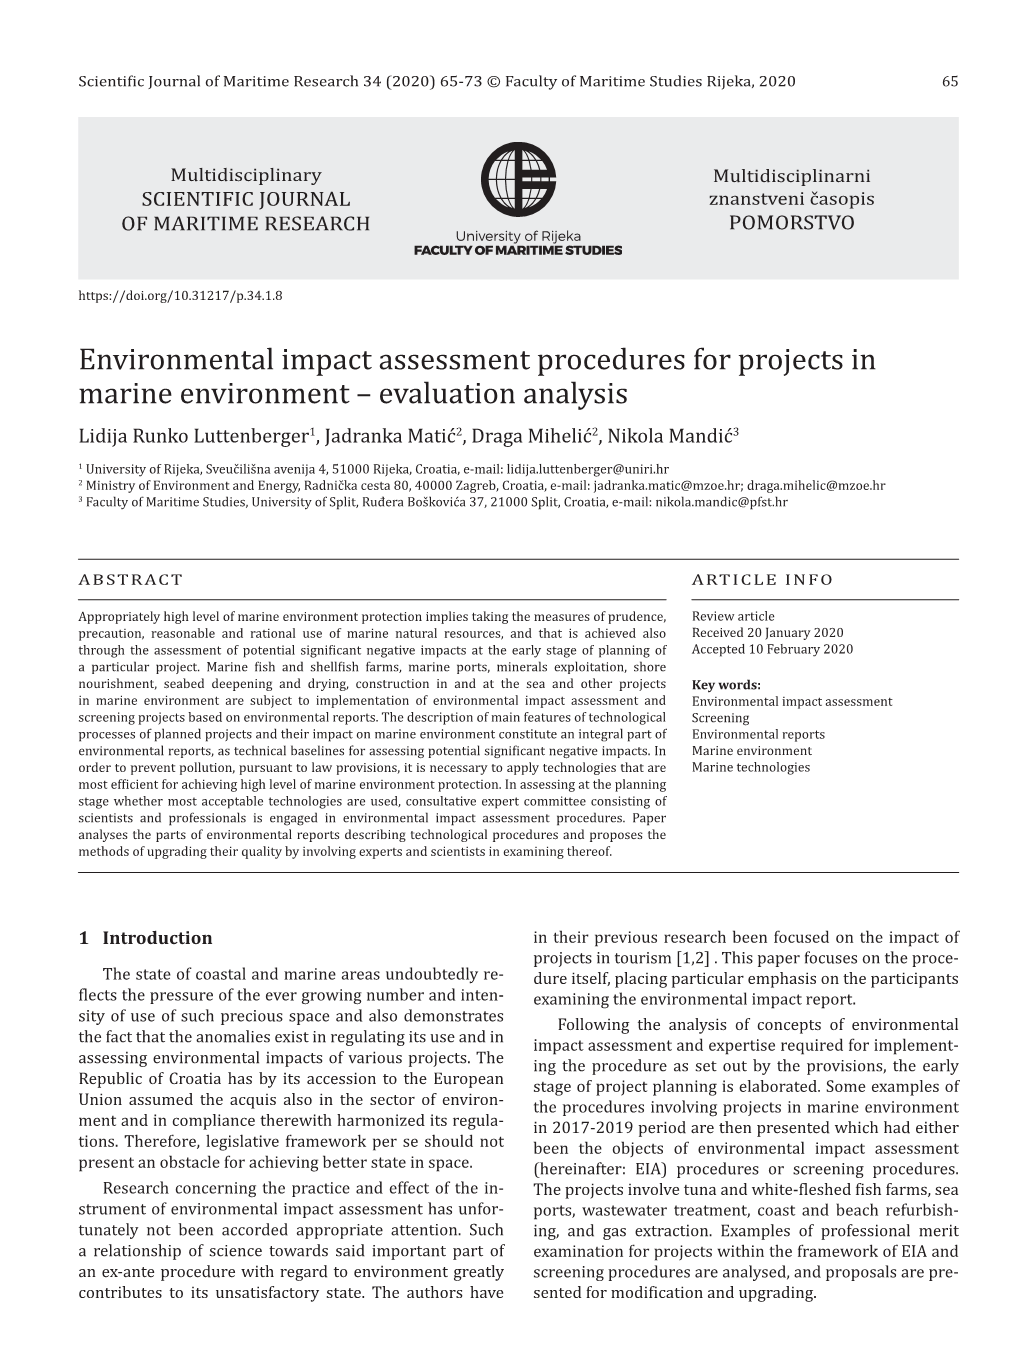 Environmental Impact Assessment Procedures for Projects in Marine